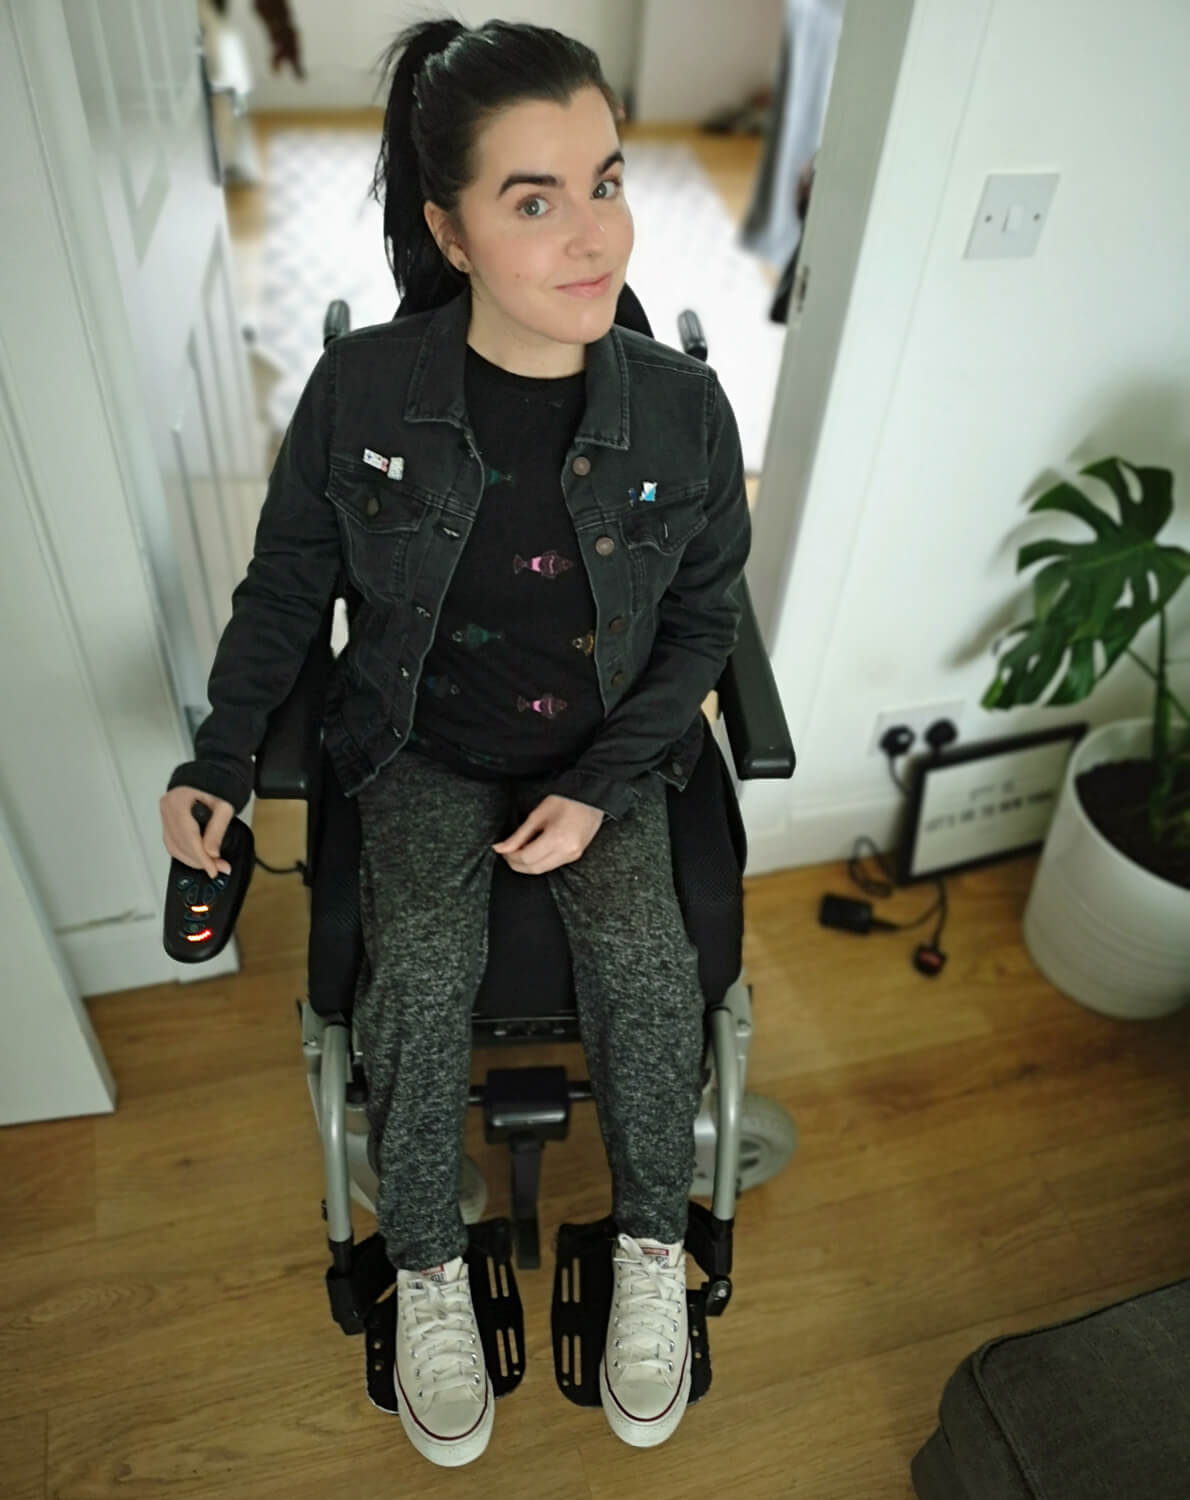 Emma is sitting in her wheelchair in her livingroom. She is wearing grey jogging bottoms, white converse shoes, a black top and black denim jacket.